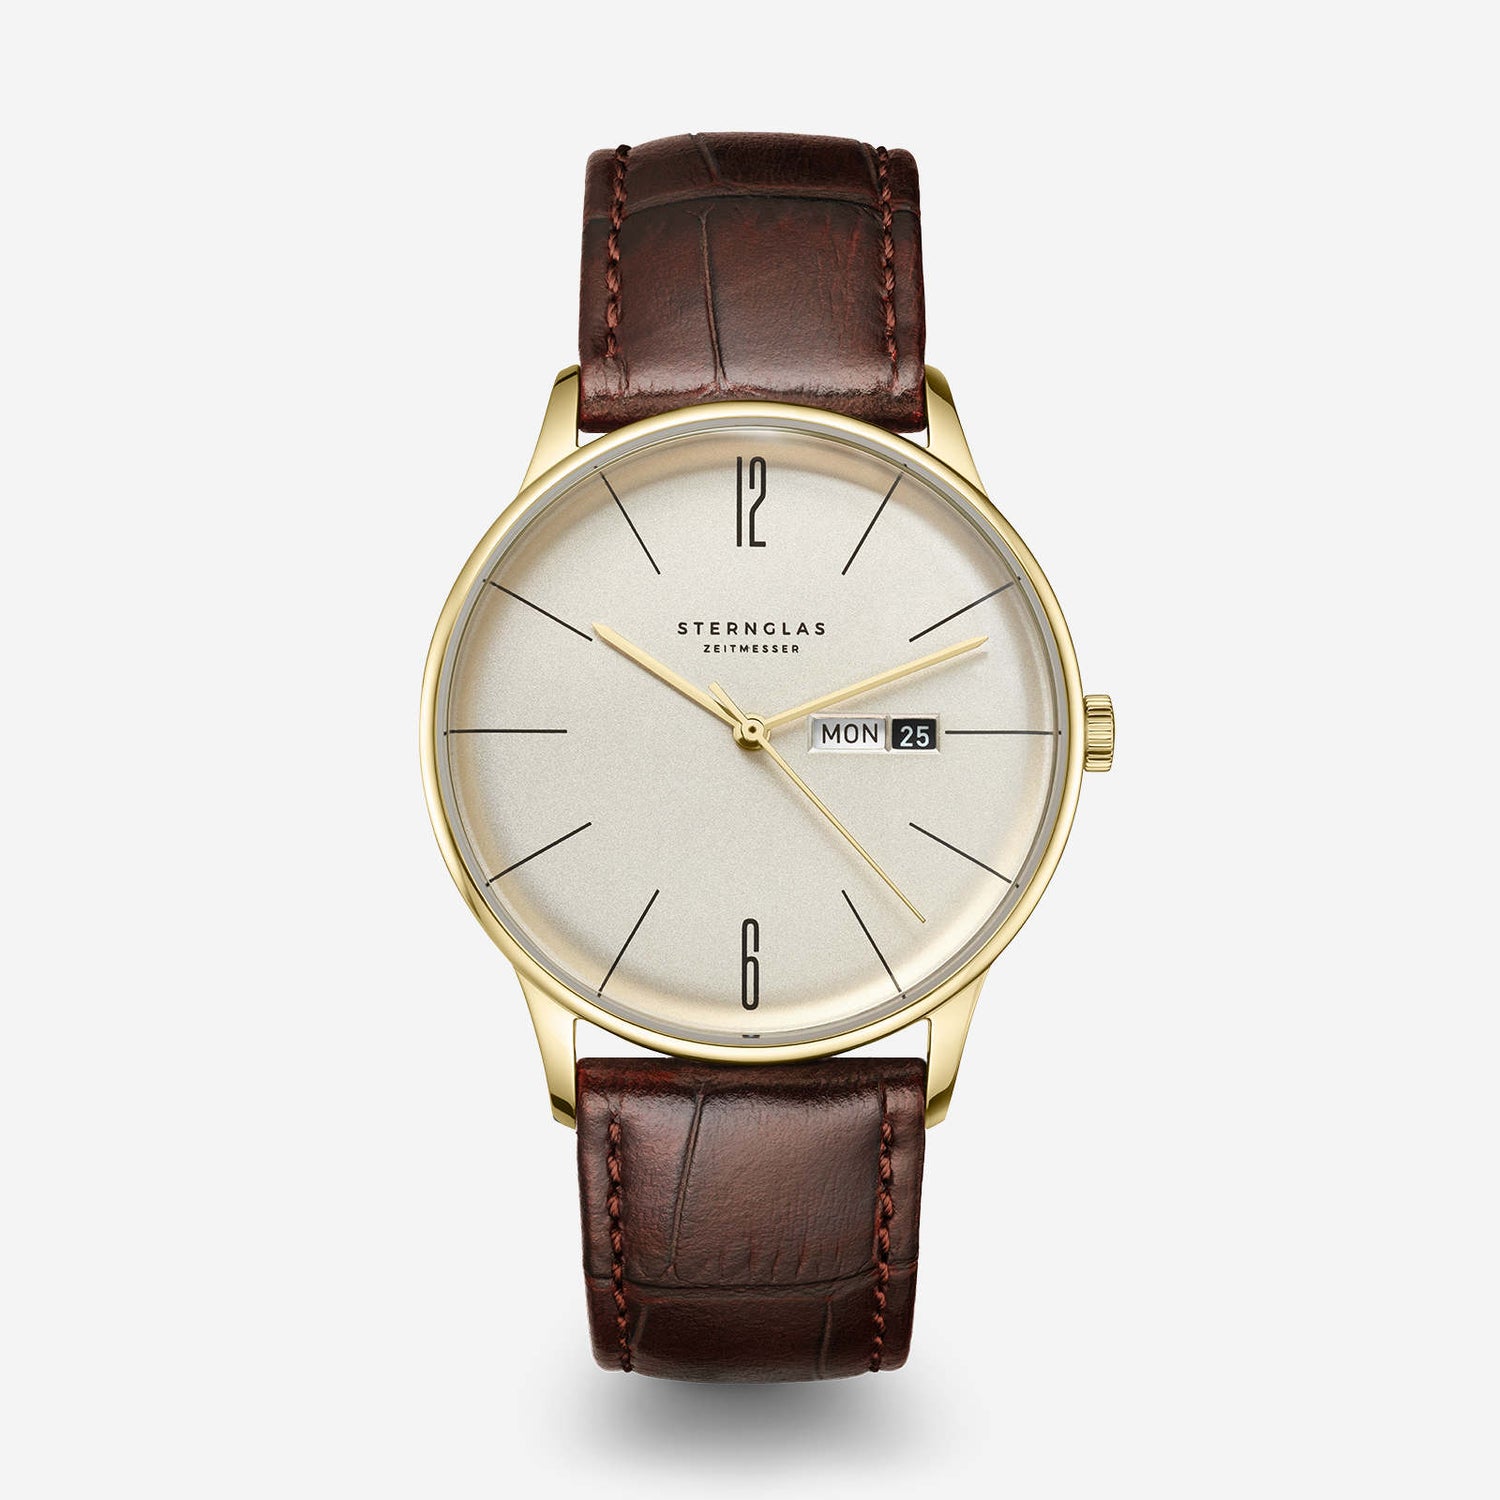 popup|Curved vintage-style dial|Inspired by the Berlin train station in Hamburg over 150 years ago, the dial is reduced and kept clear. The fine satin finish gives the dial with its delicate indices a timeless classic look.